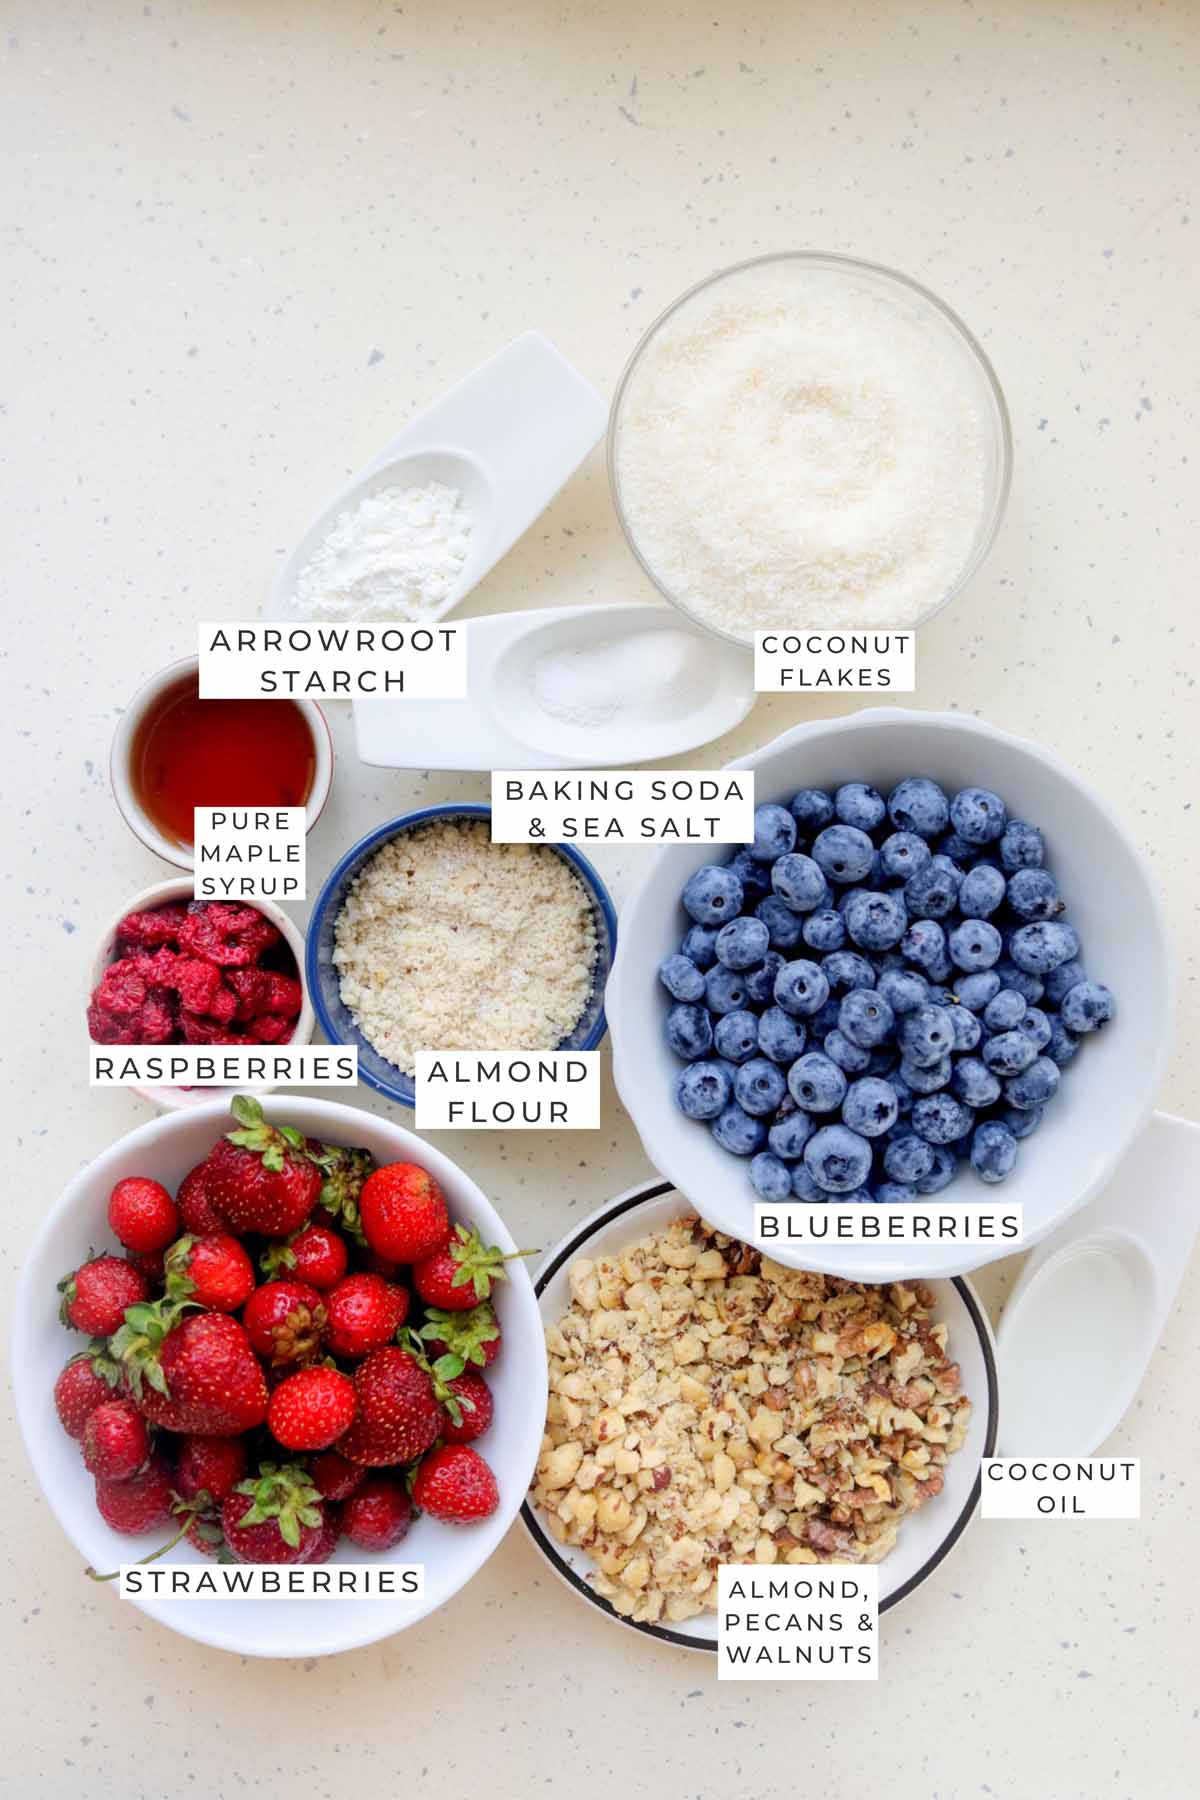 Labeled ingredients for the berry crumble.